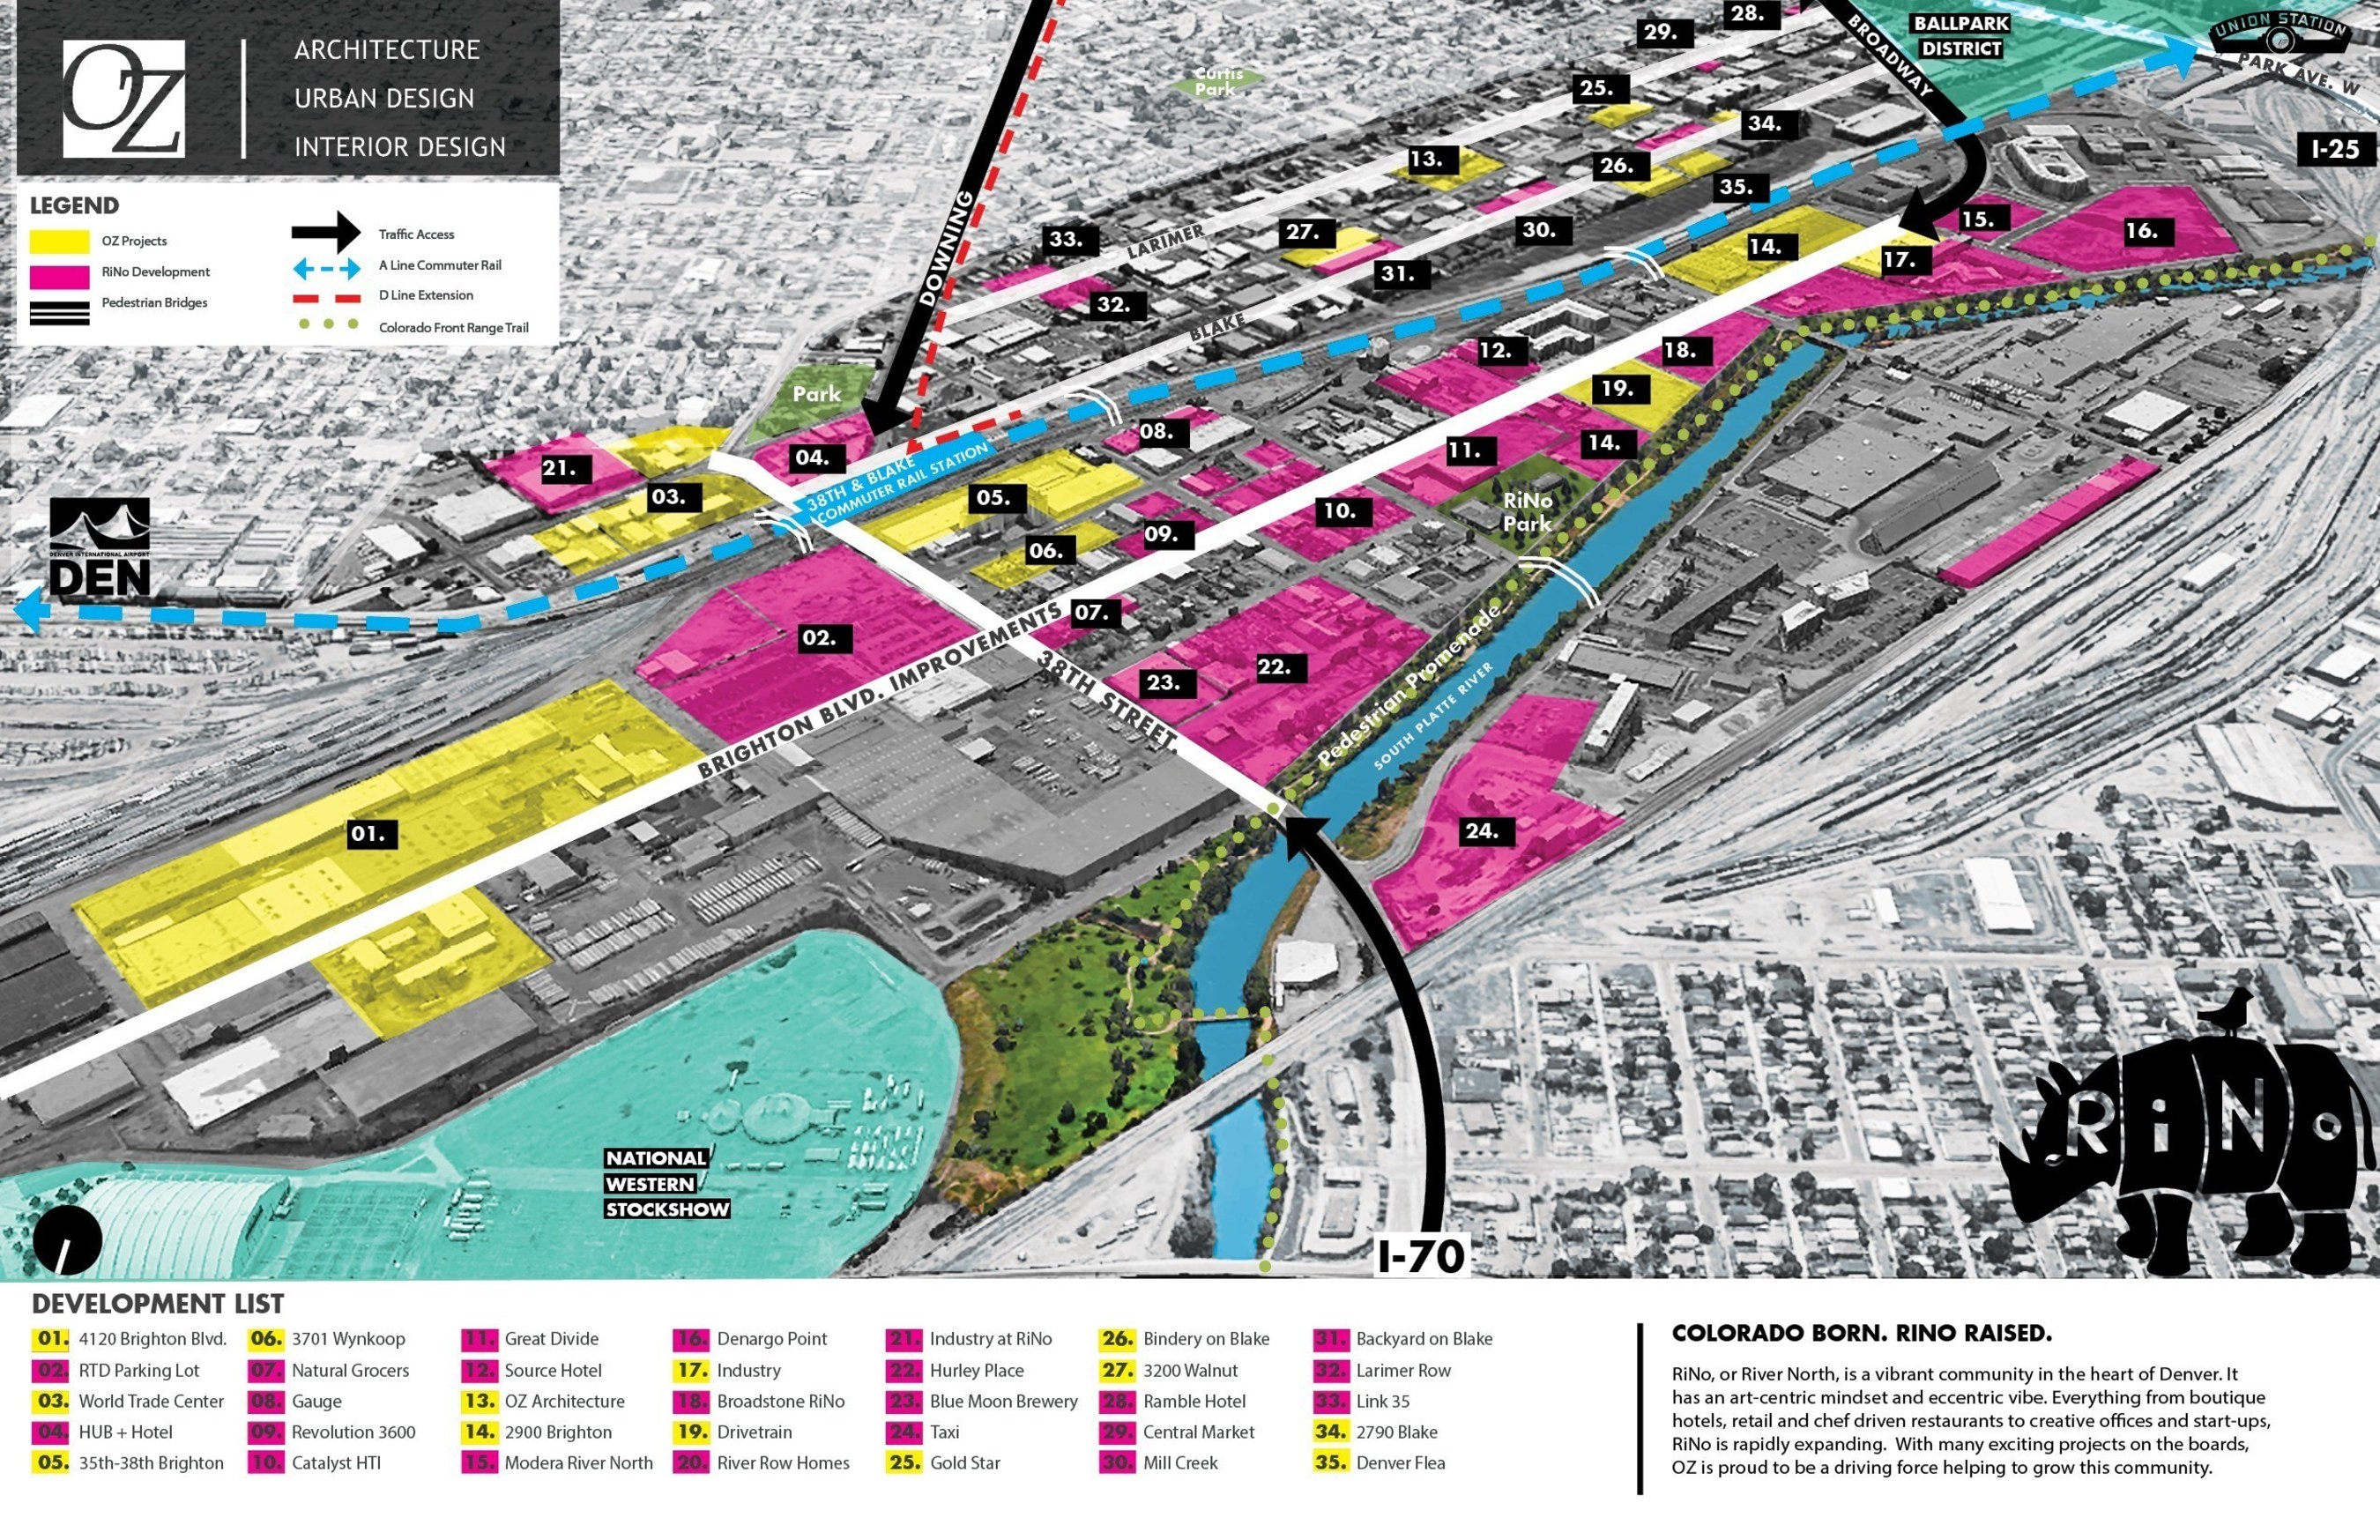 RiNo Denver expansion map shows OZ Architecture designs dominating the landscape. The company is both located in RiNo and is driving a significant part of the area's transformation.